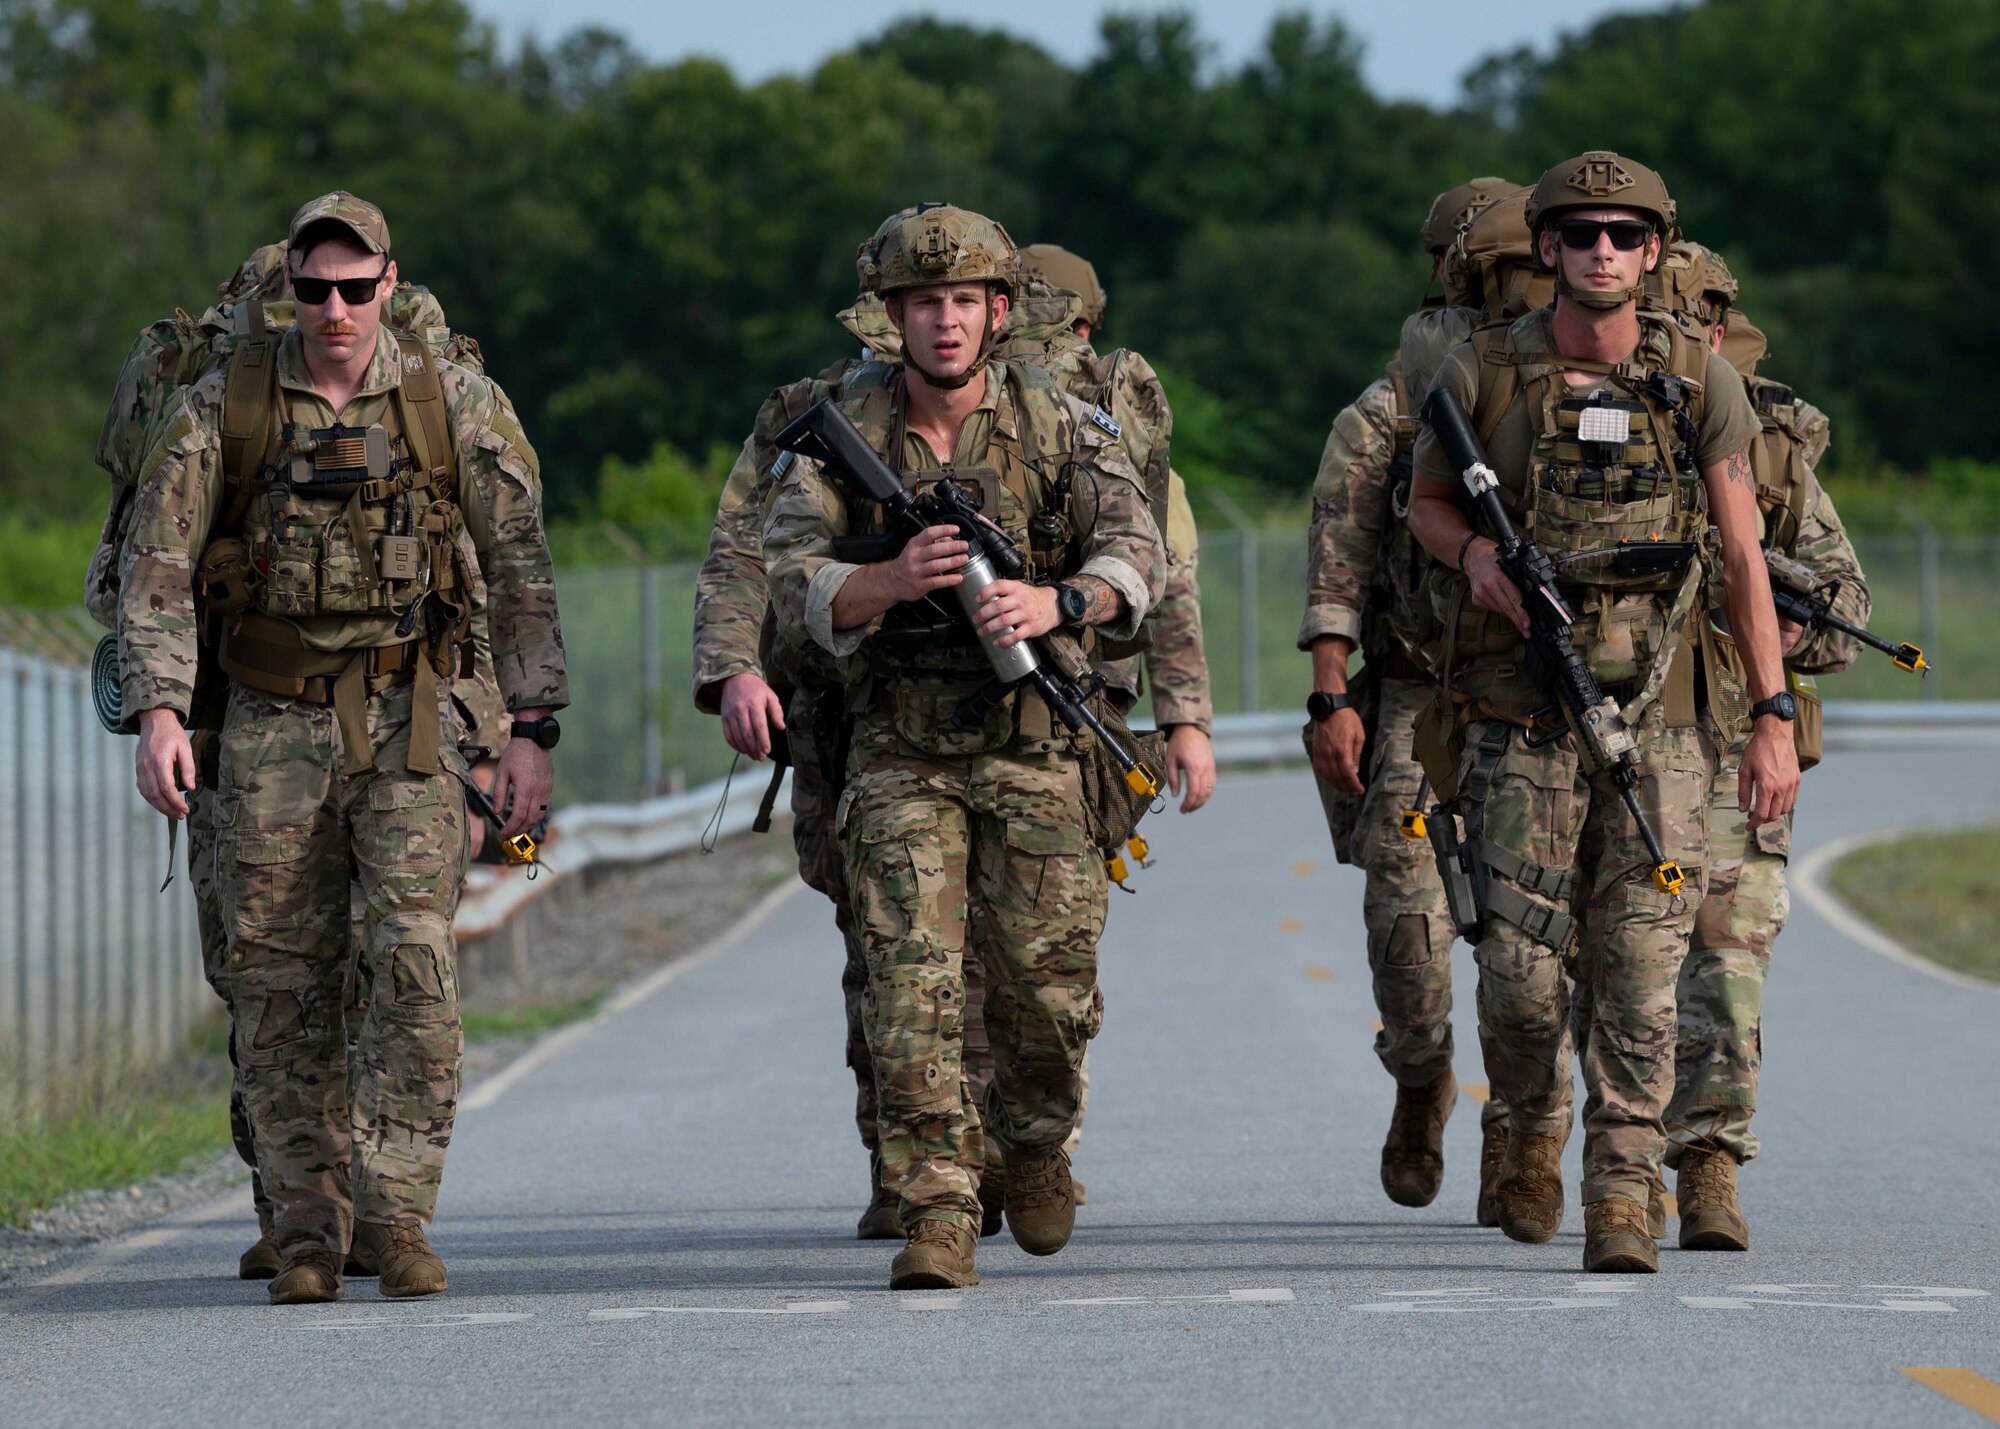 Explosive ordnance disposal members from Seymour Johnson Air Force Base, North Carolina, Andrews AFB, Maryland and Shaw AFB, South Carolina, ruck march to a training site on Seymour Johnson AFB, July 25, 2021. The EOD members participated in a five-day field training exercise, Operation Guillotine. (U.S. Air Force photo by Senior Airman Kimberly Barrera)